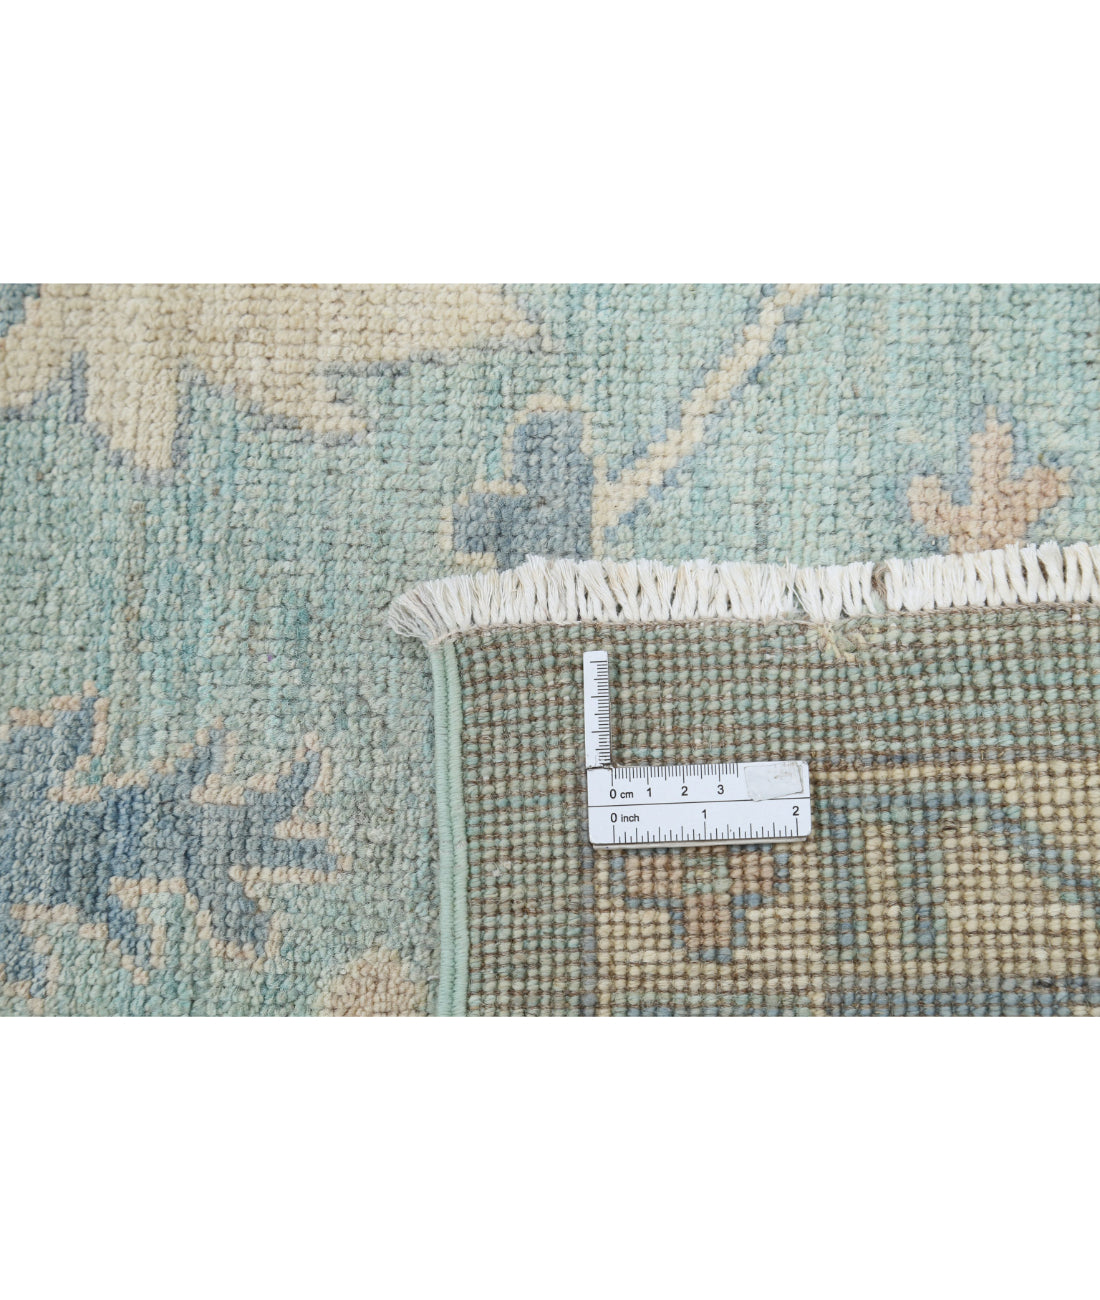 Hand Knotted Oushak Wool Rug - 9'3'' x 11'9'' 9'3'' x 11'9'' (278 X 353) / Green / Blue